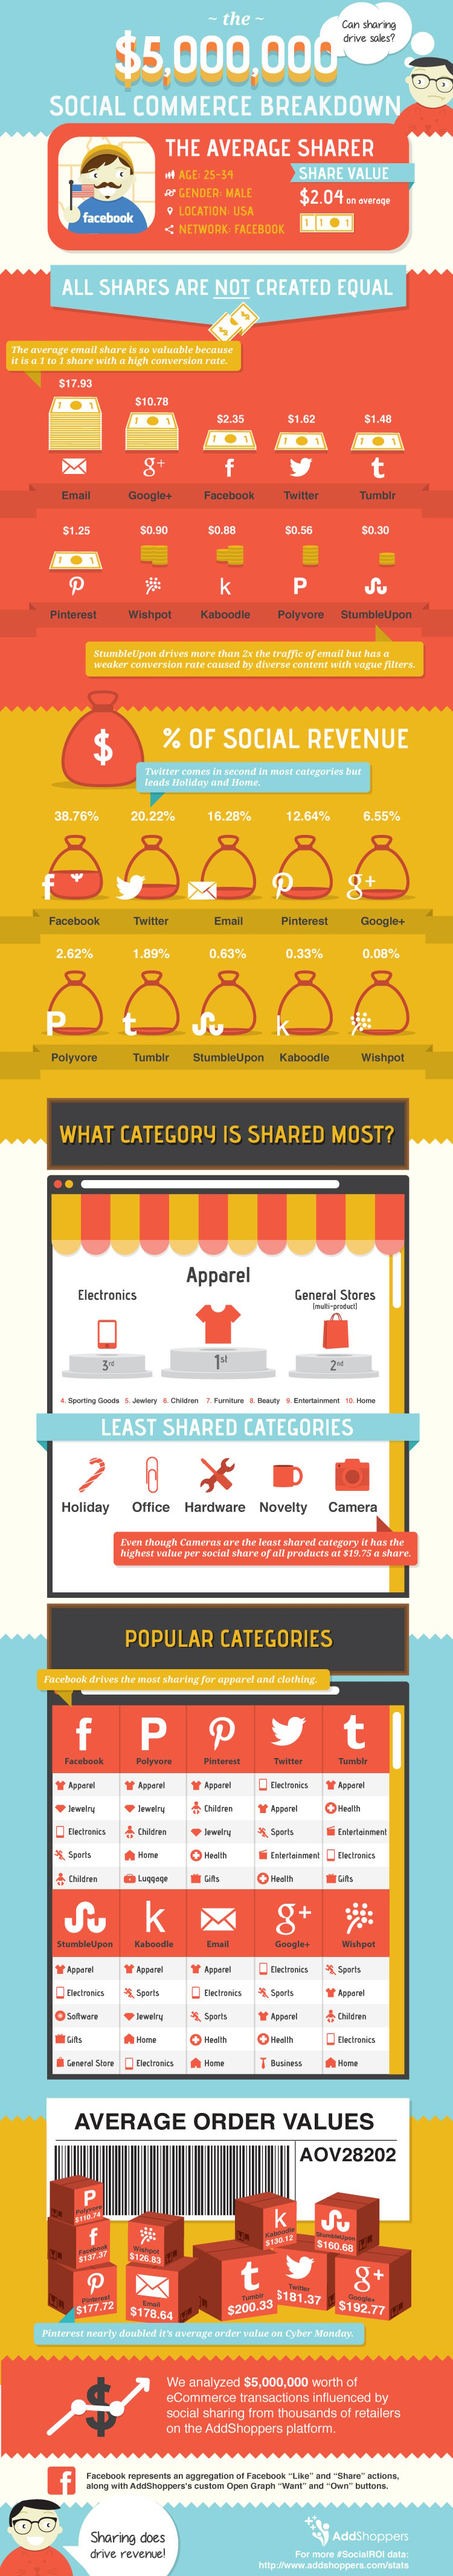 social_sharing_addshoppers_infographic